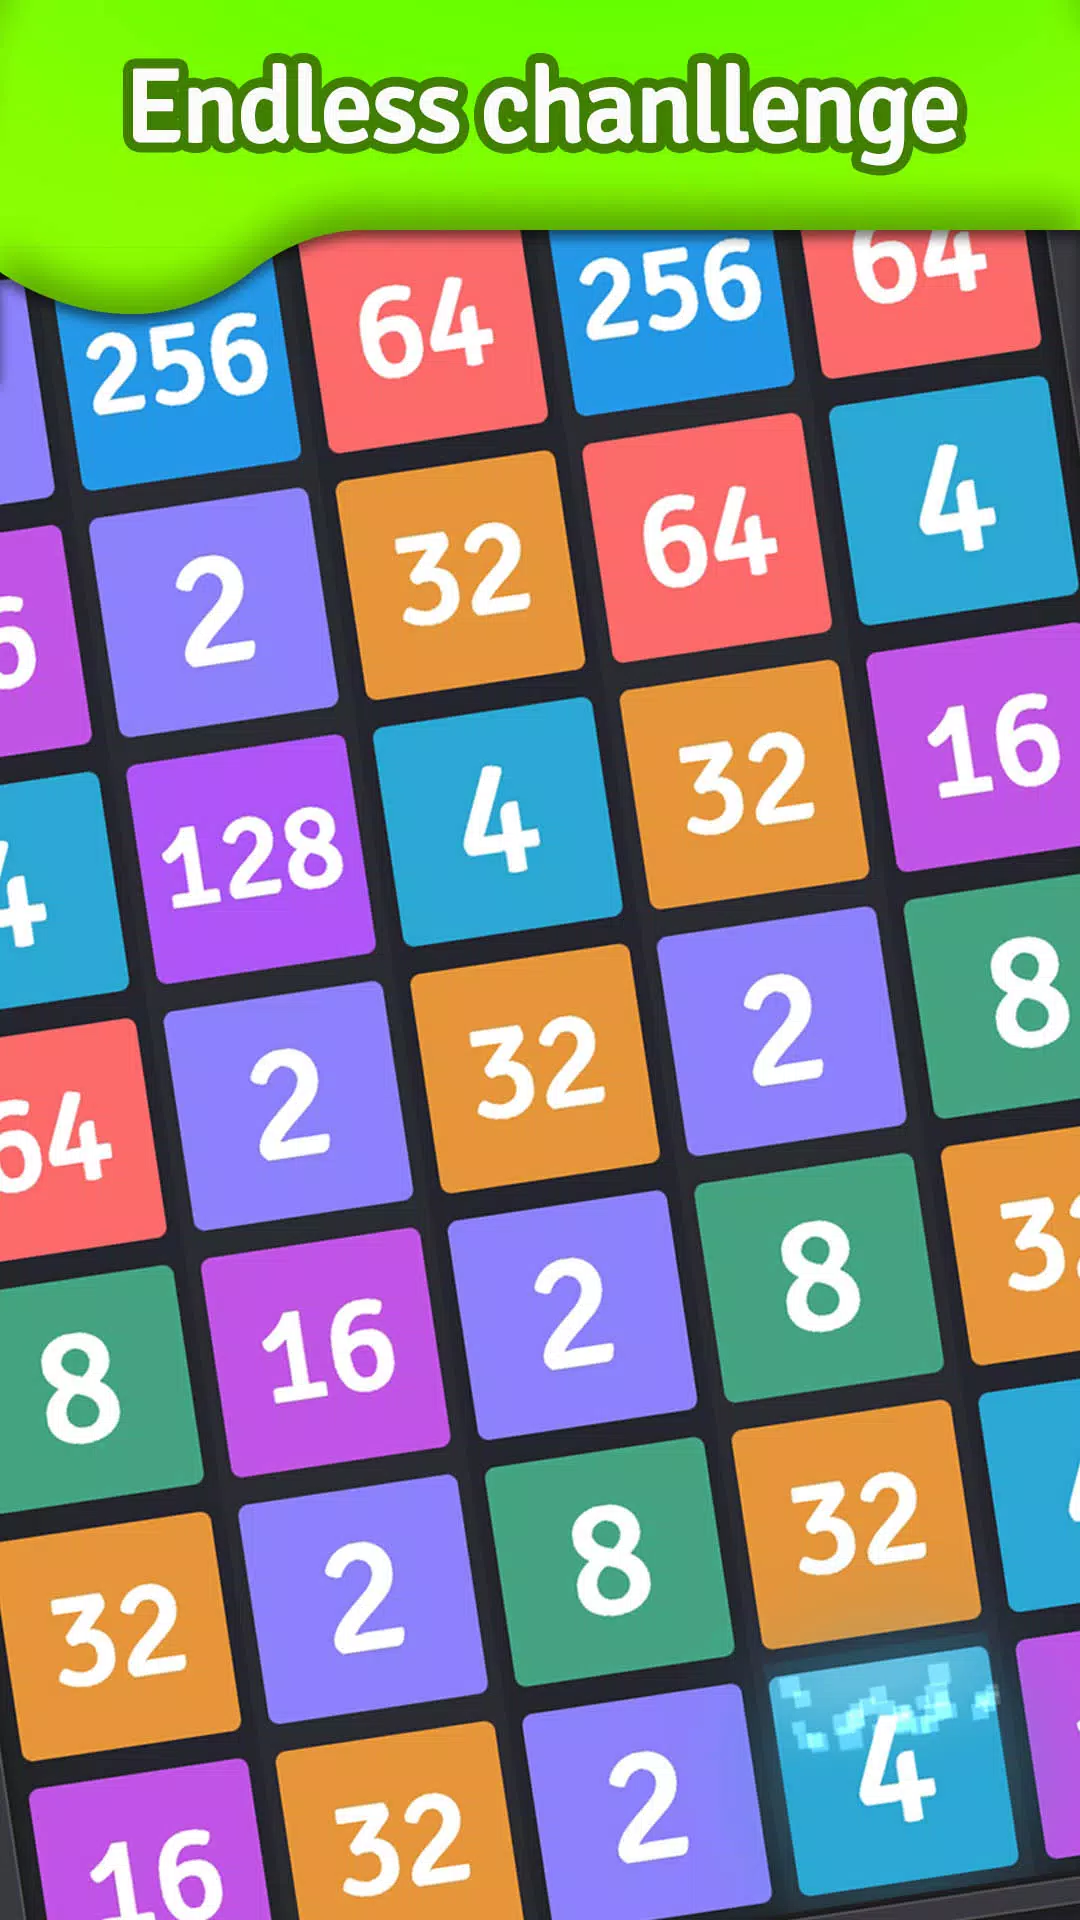 2048 Classic: Endless 2D Game - Apps on Google Play